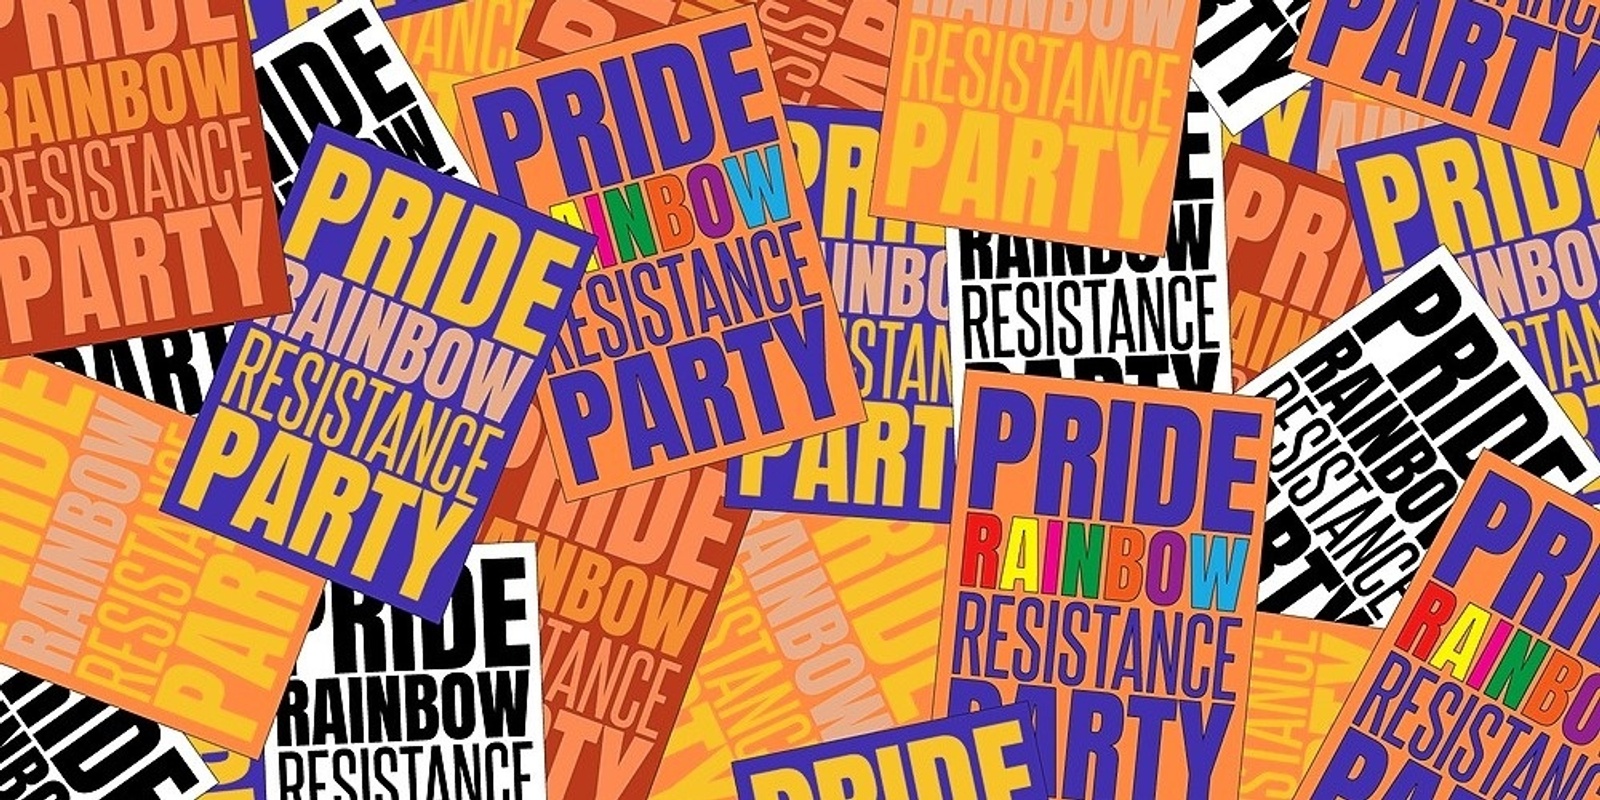 Banner image for Rainbow Resistance Pride Party